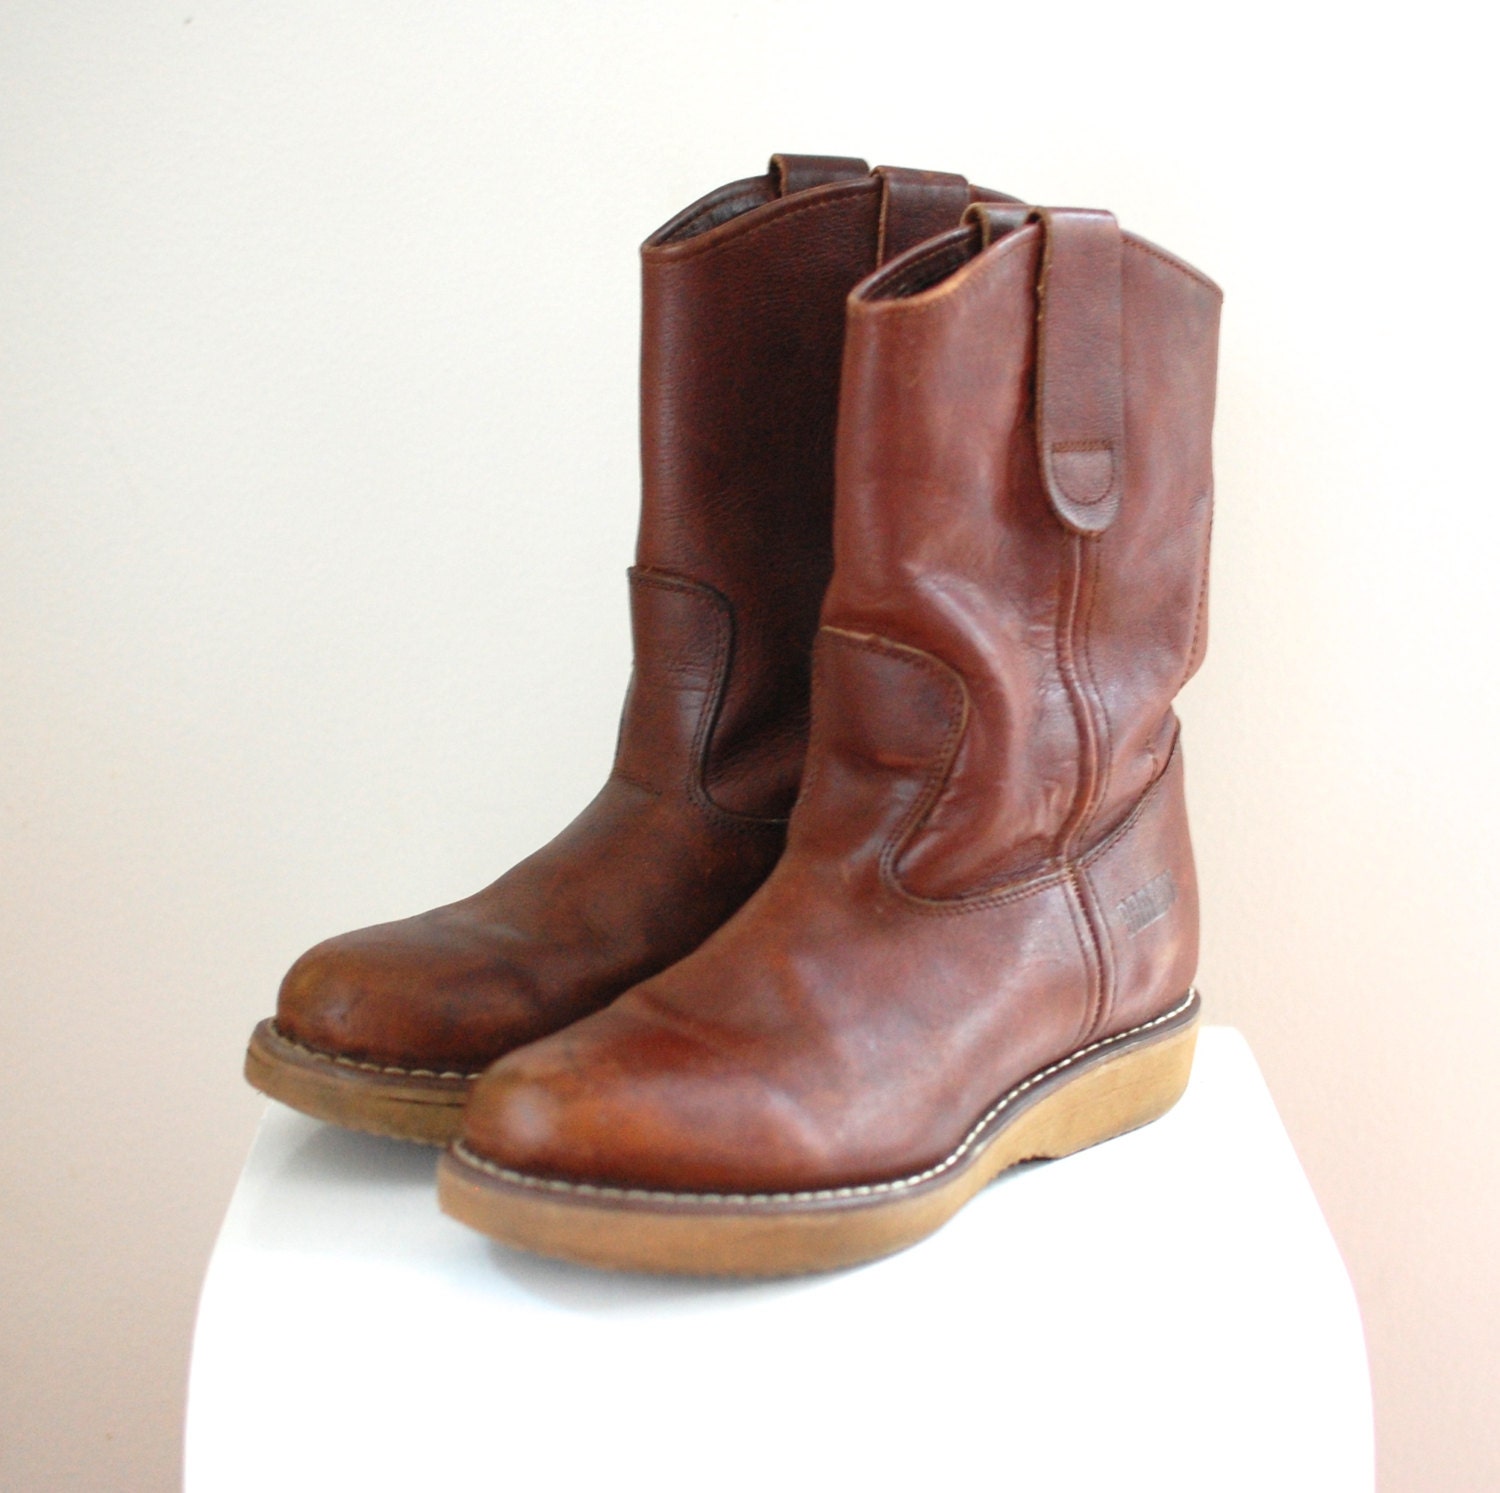 Brown Brazos Work Boots/ Leather Casual Flat Boots Boots/